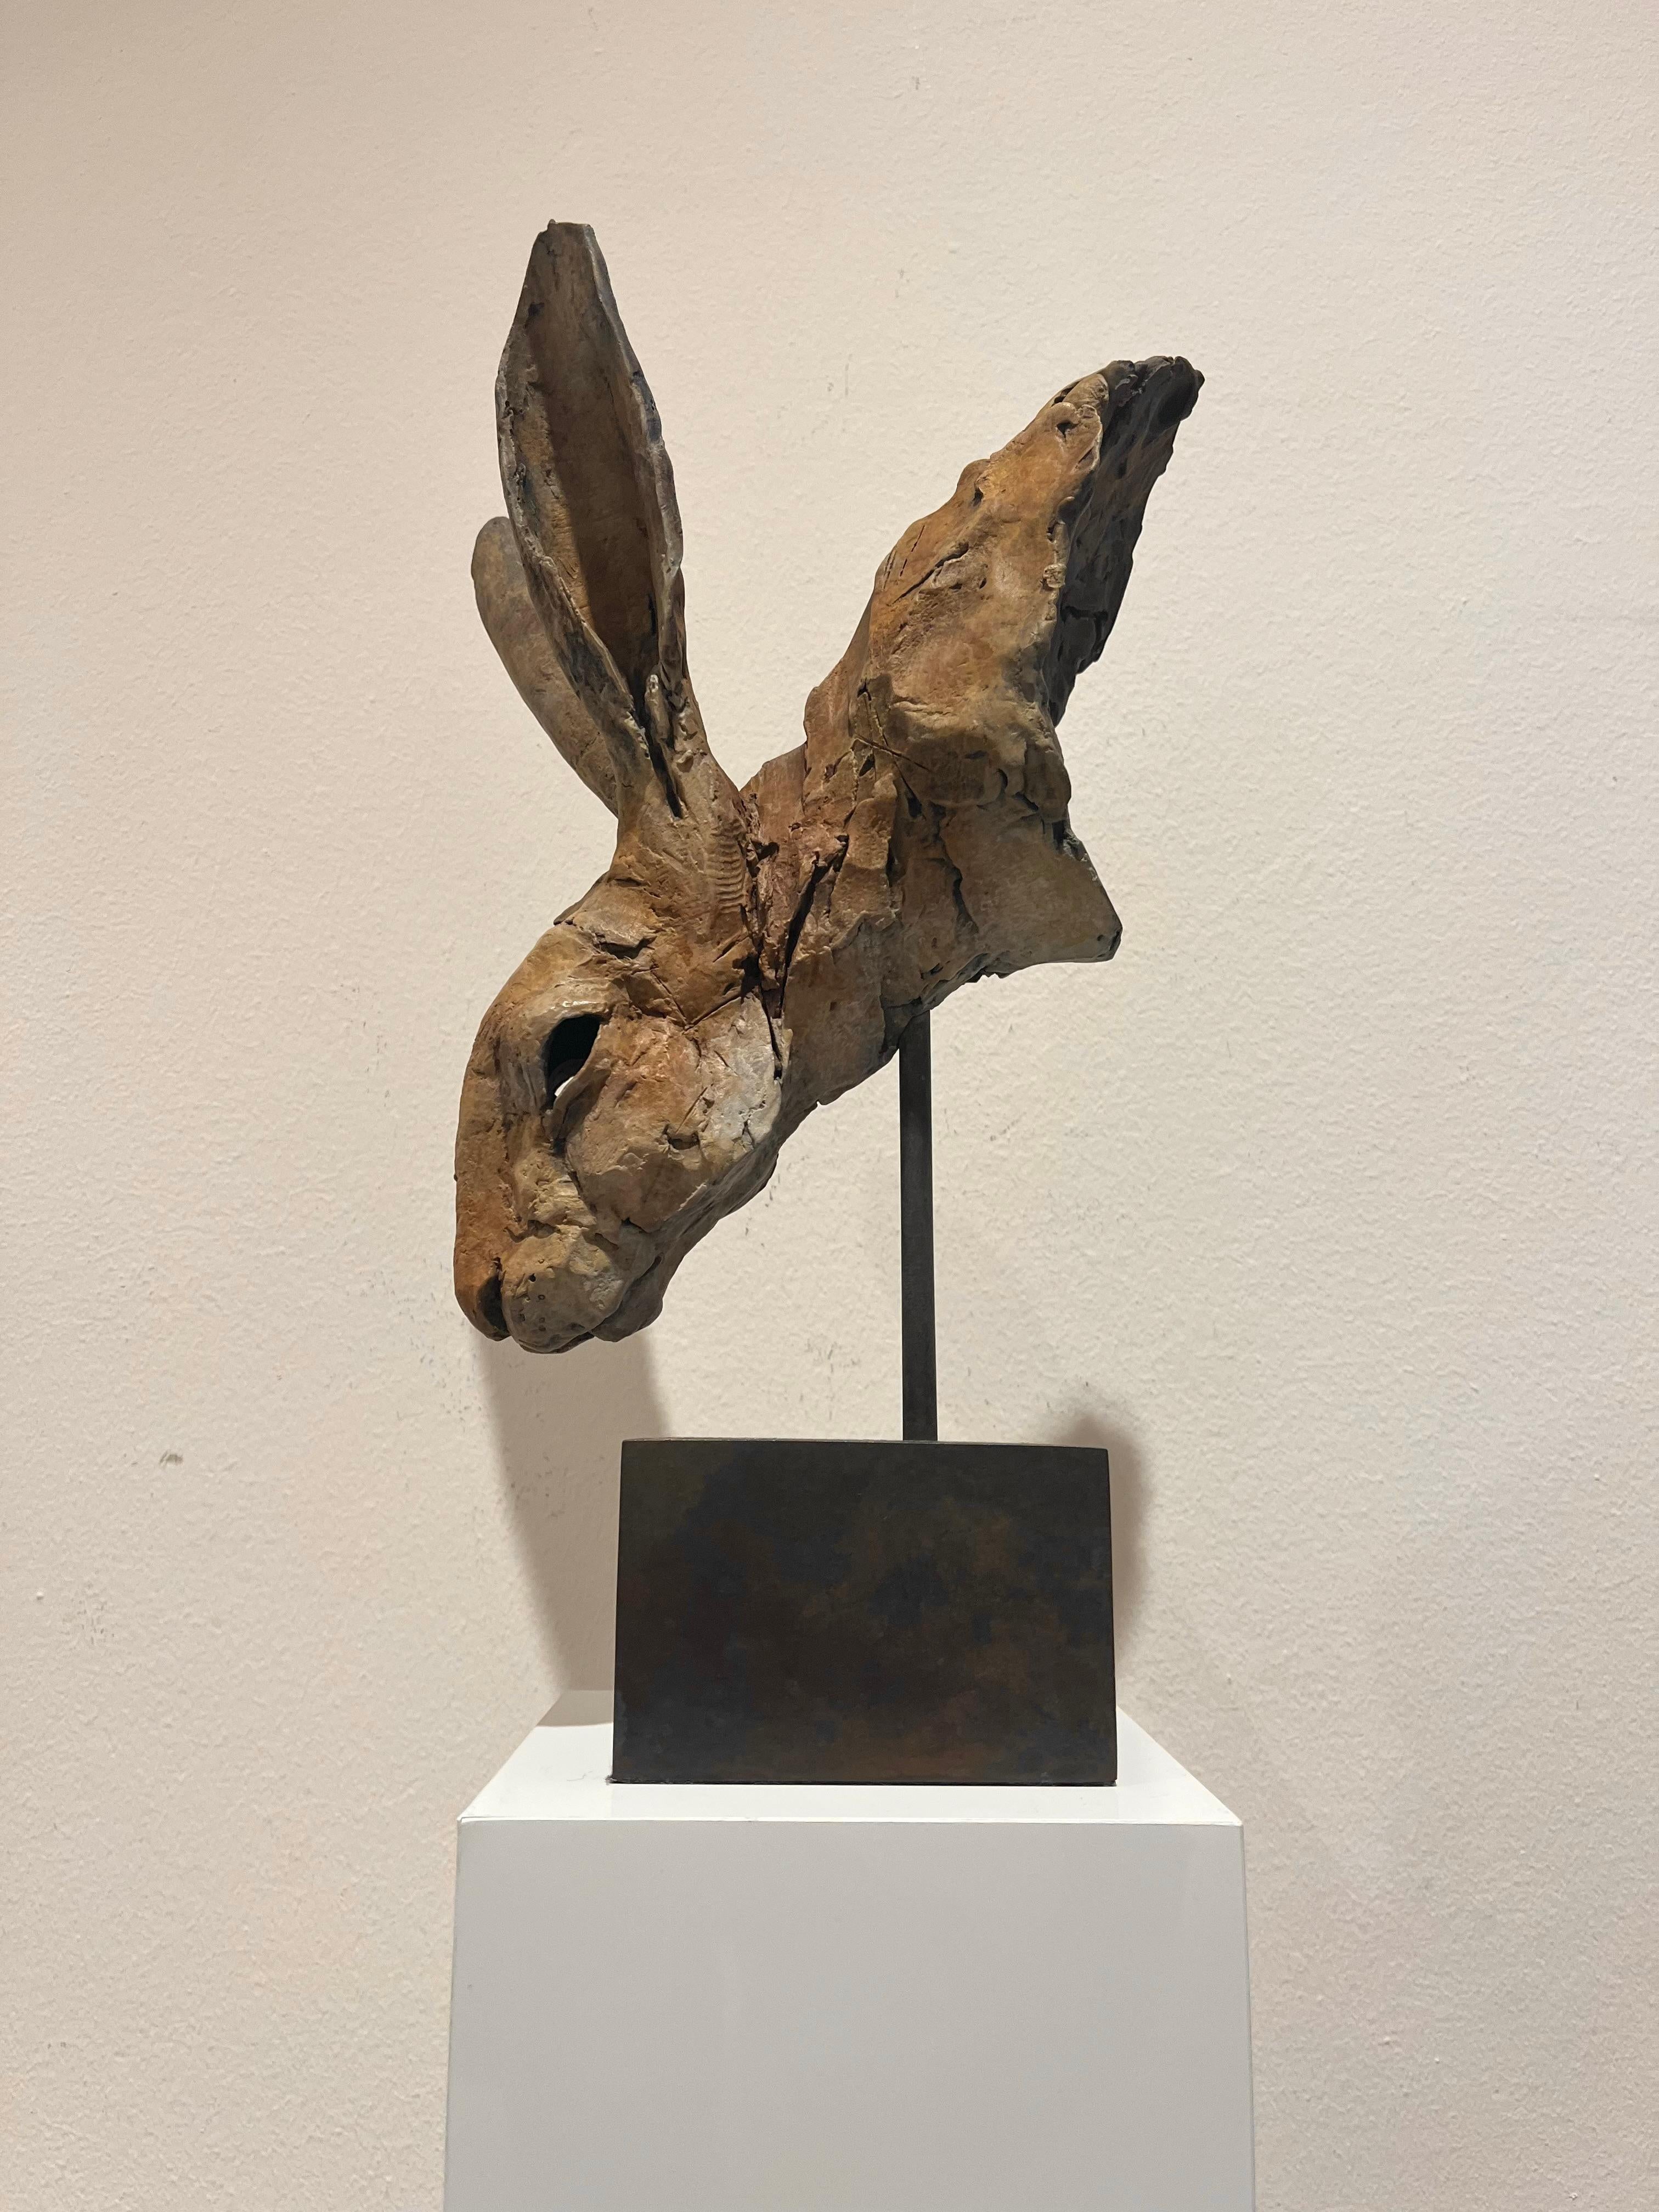 Nichola Theakston (1967) has established herself as one of the UK’s foremost contemporary sculptors working within the animal genre.  

With the ''Hare Head Study 3'' Nichola shows how exquisite she can capture the feelings and expressions in an